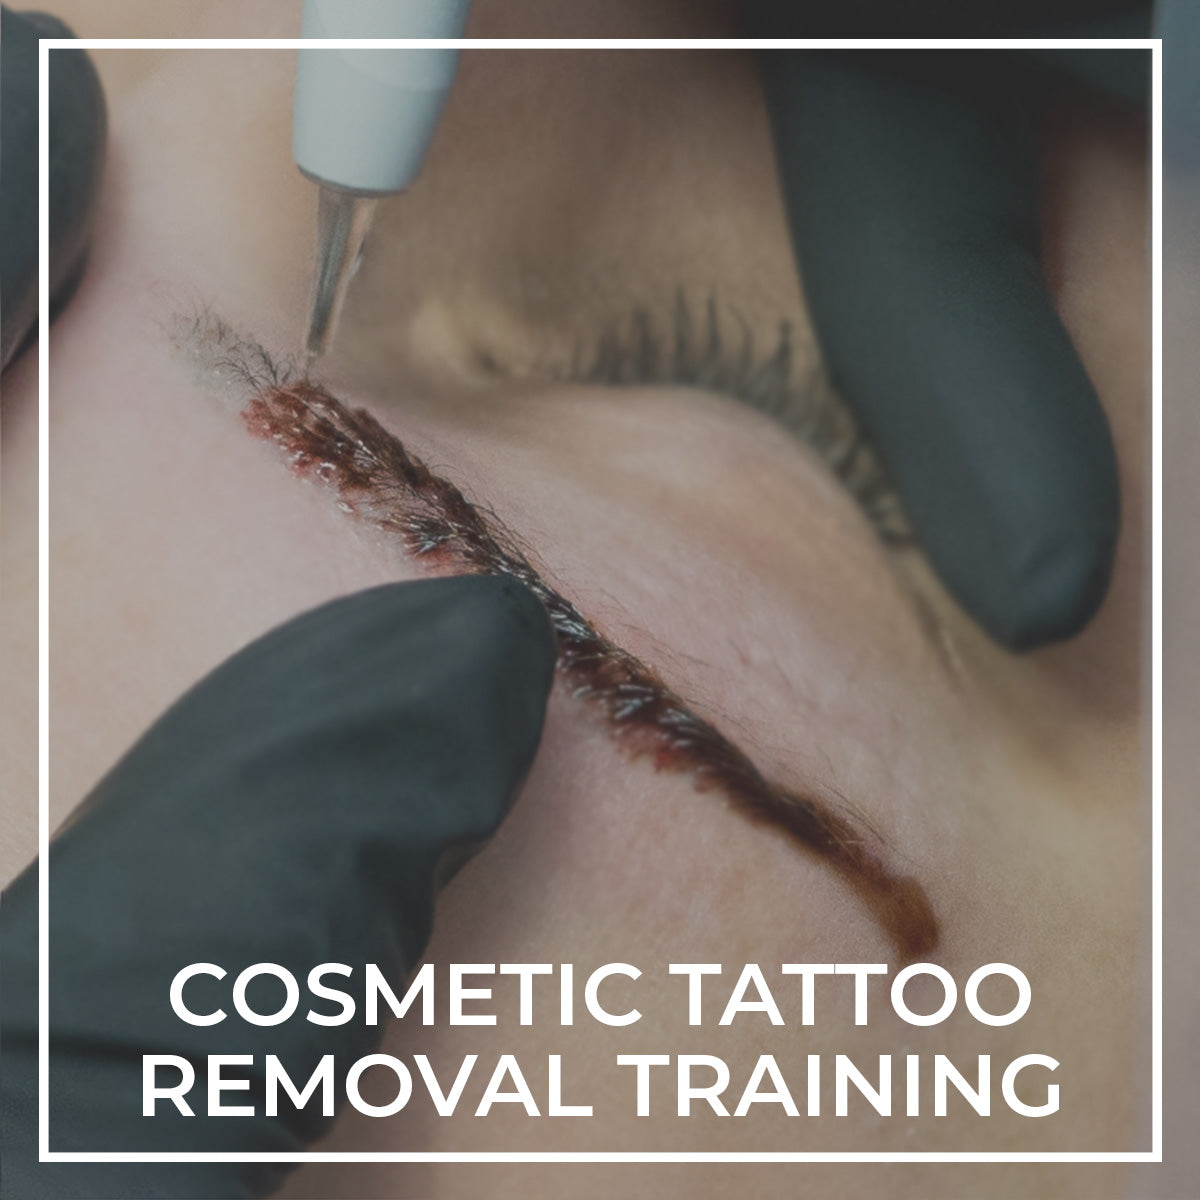 Laser Tattoo Removal Training Certifications  New Look Laser College